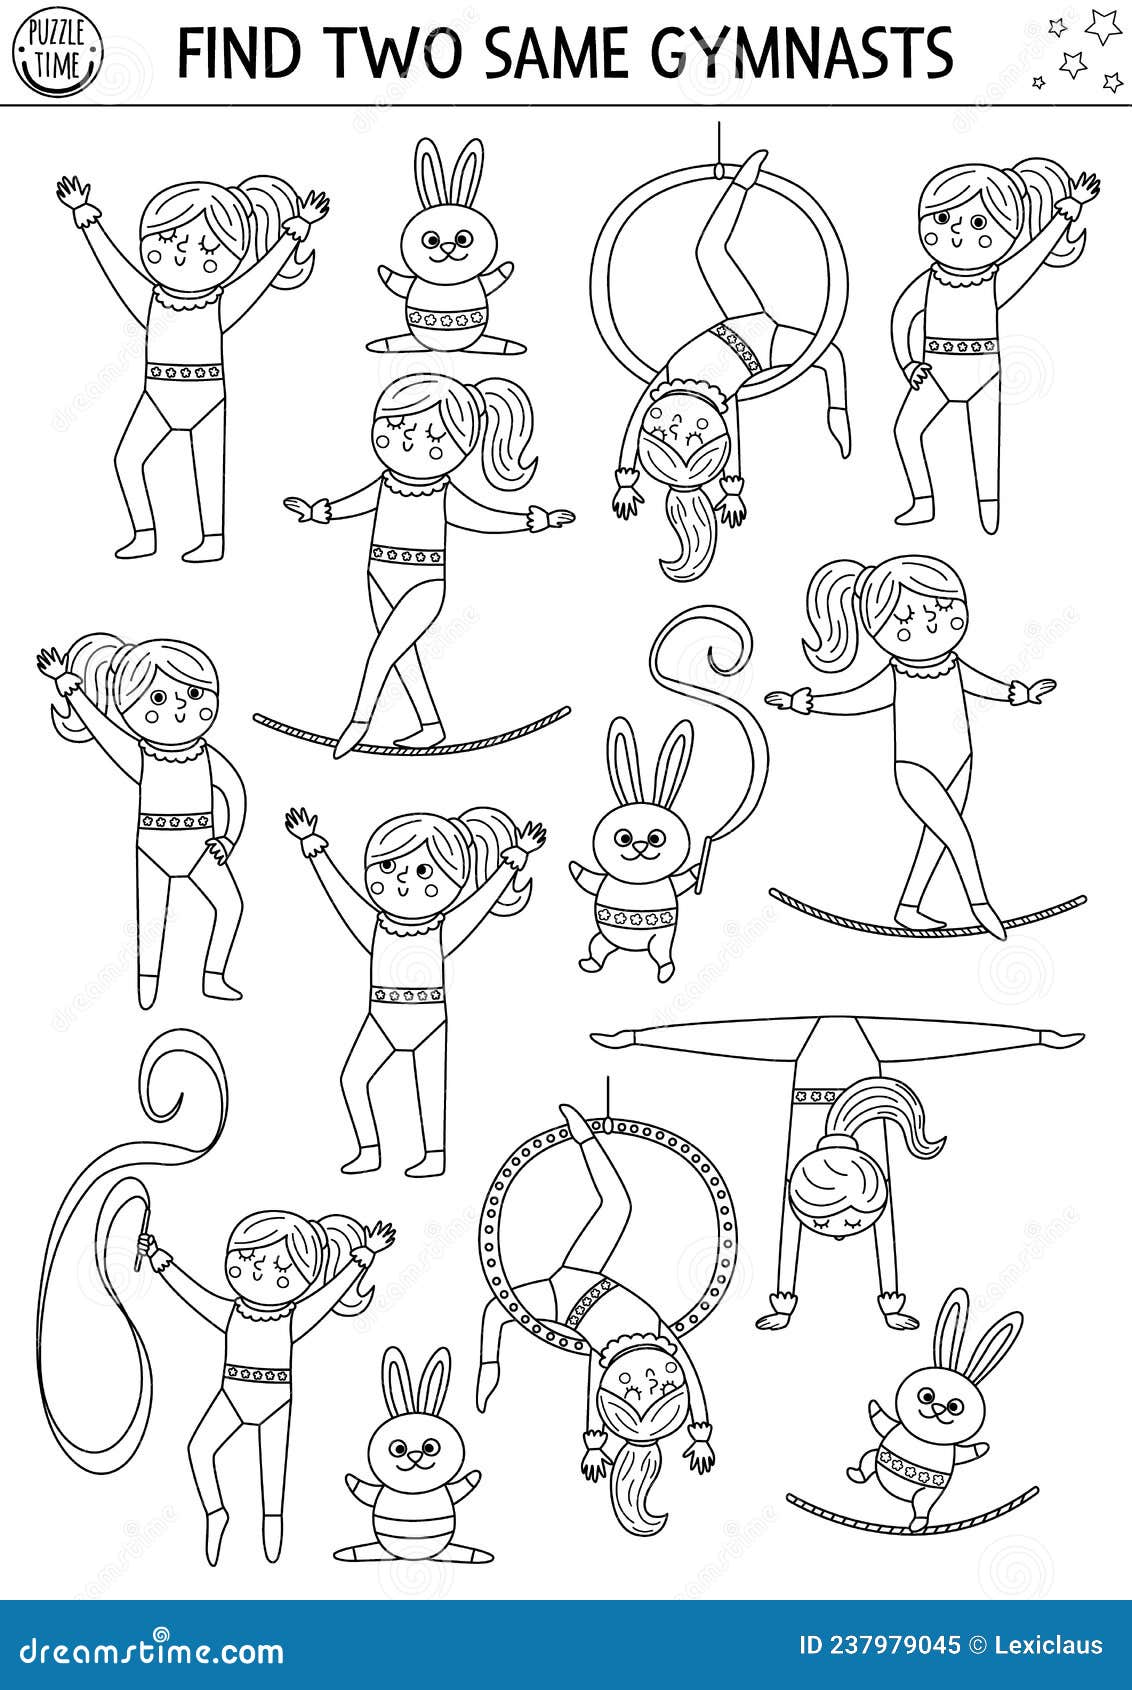 Find Two Same Gymnasts. Circus Black and White Matching Activity for ...